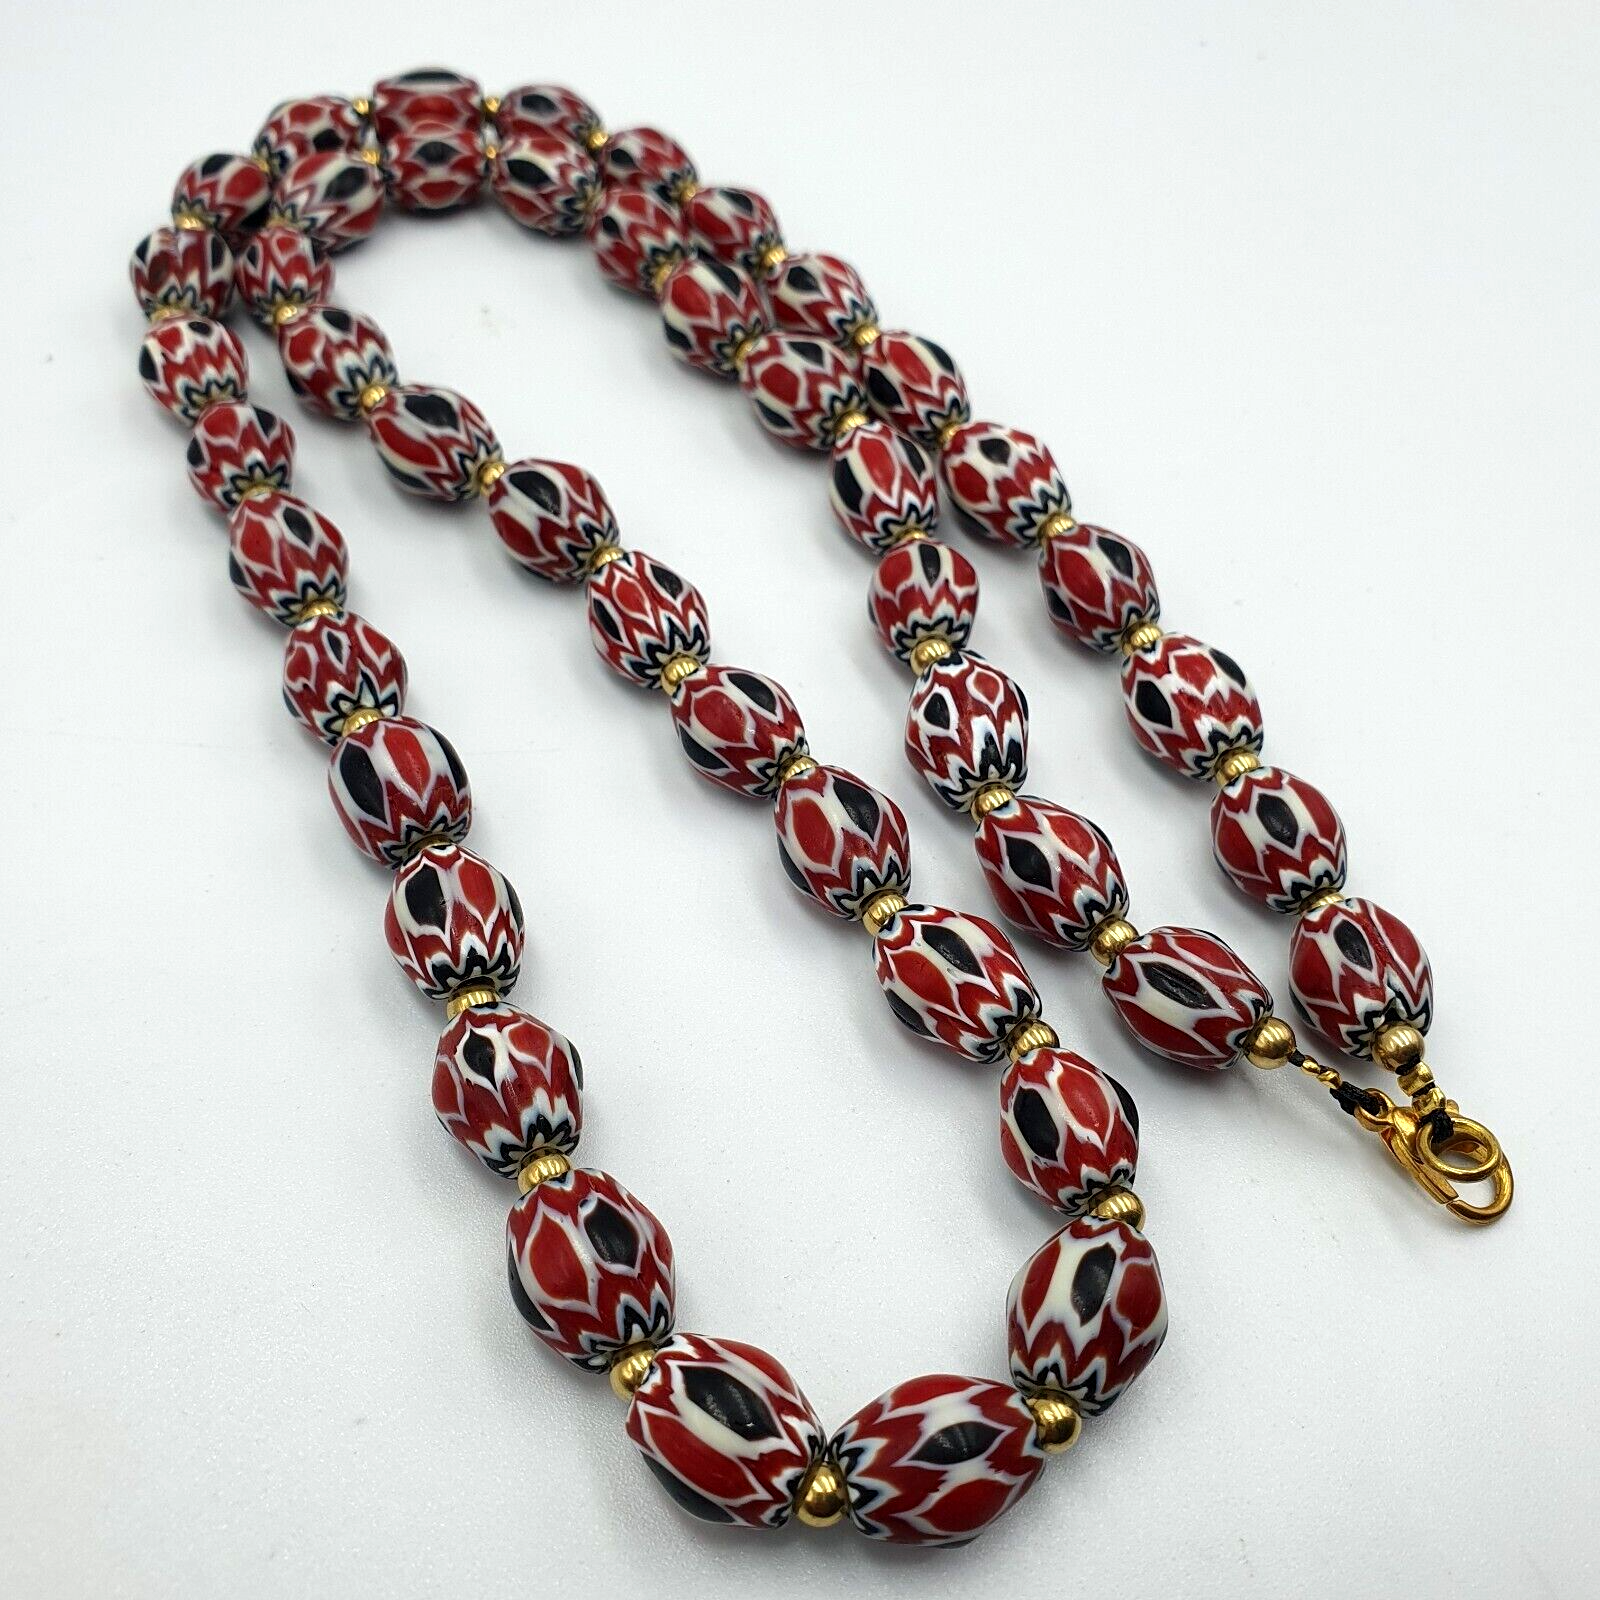 Vintage Venetian Trade Style beads Old Red Chevron Beads Strand